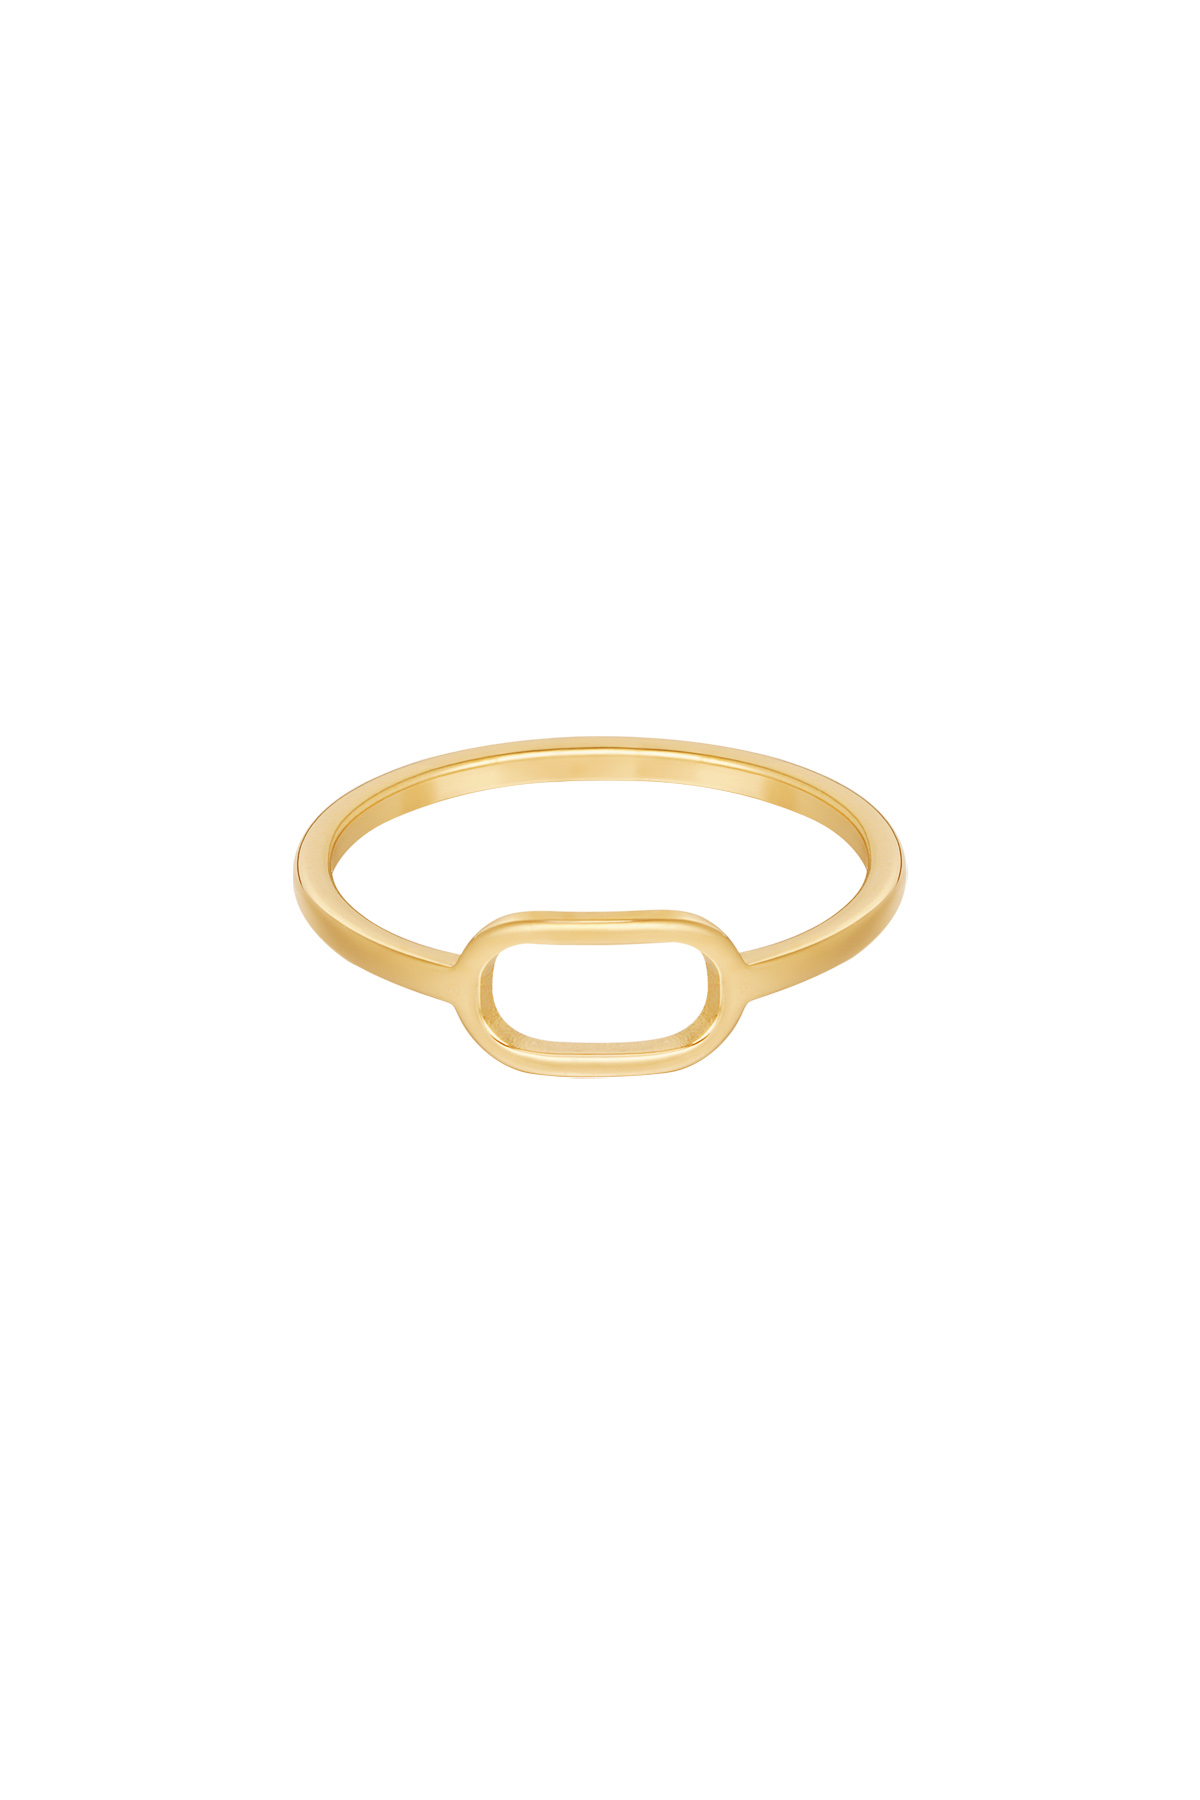 Ring cut out - gold h5 